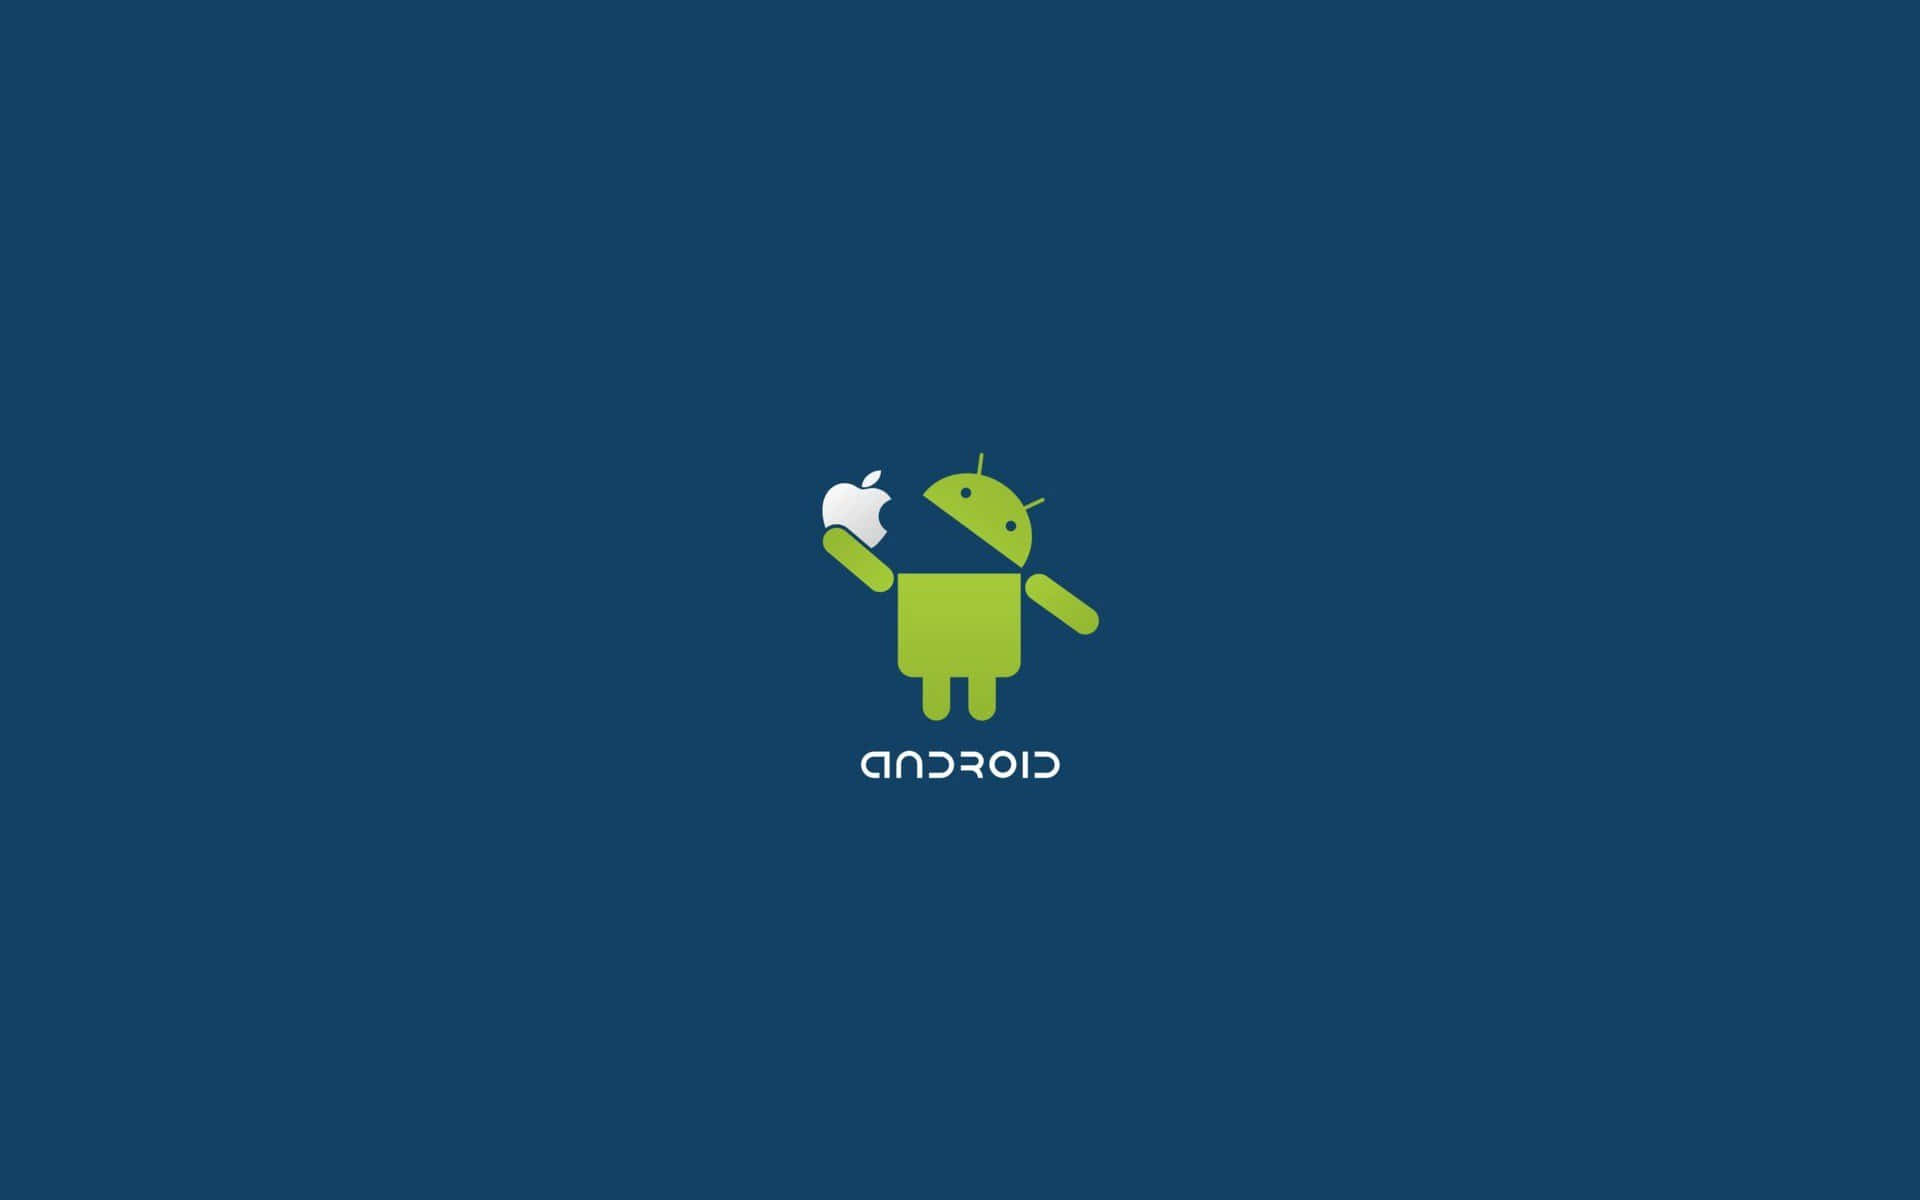 A modern Android computer device for your digital needs Wallpaper